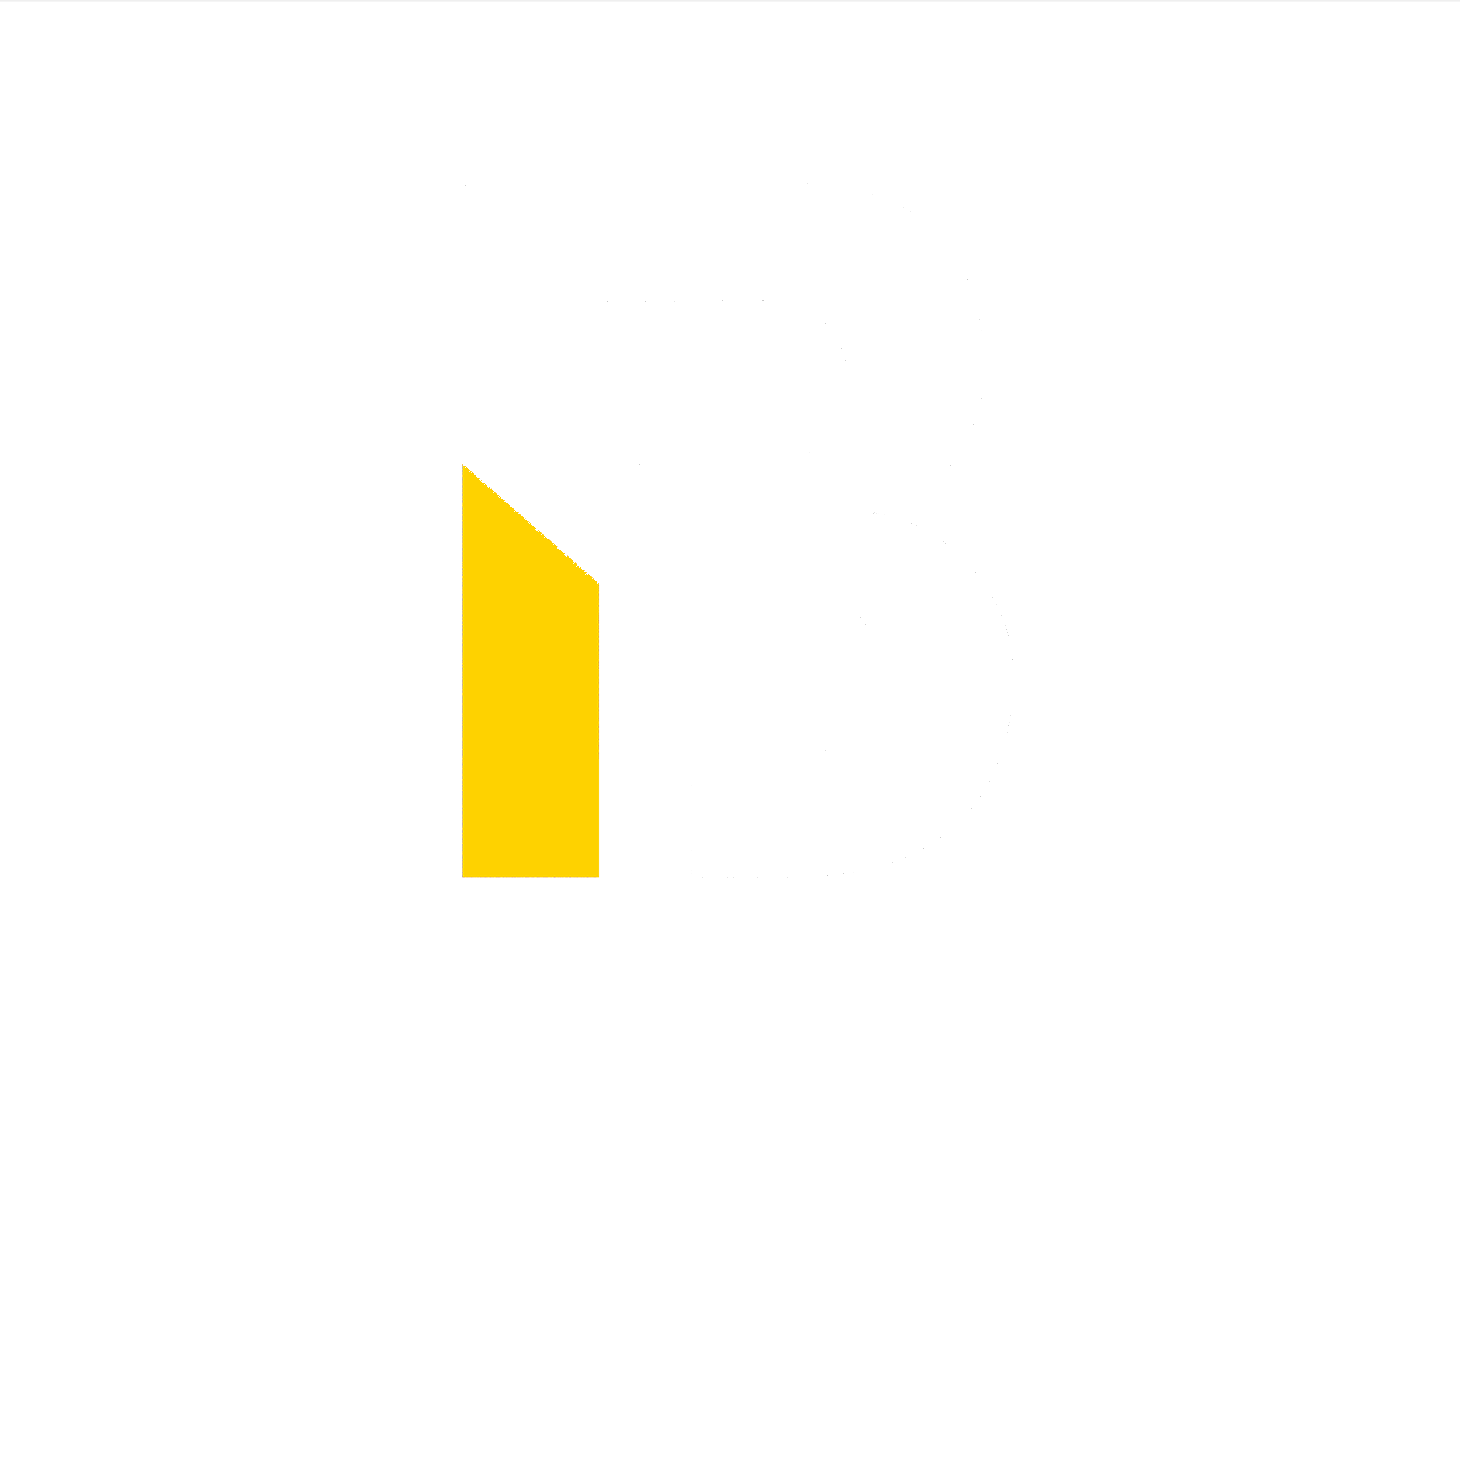 Blythe Cleaning Services in Downpatrick Logo